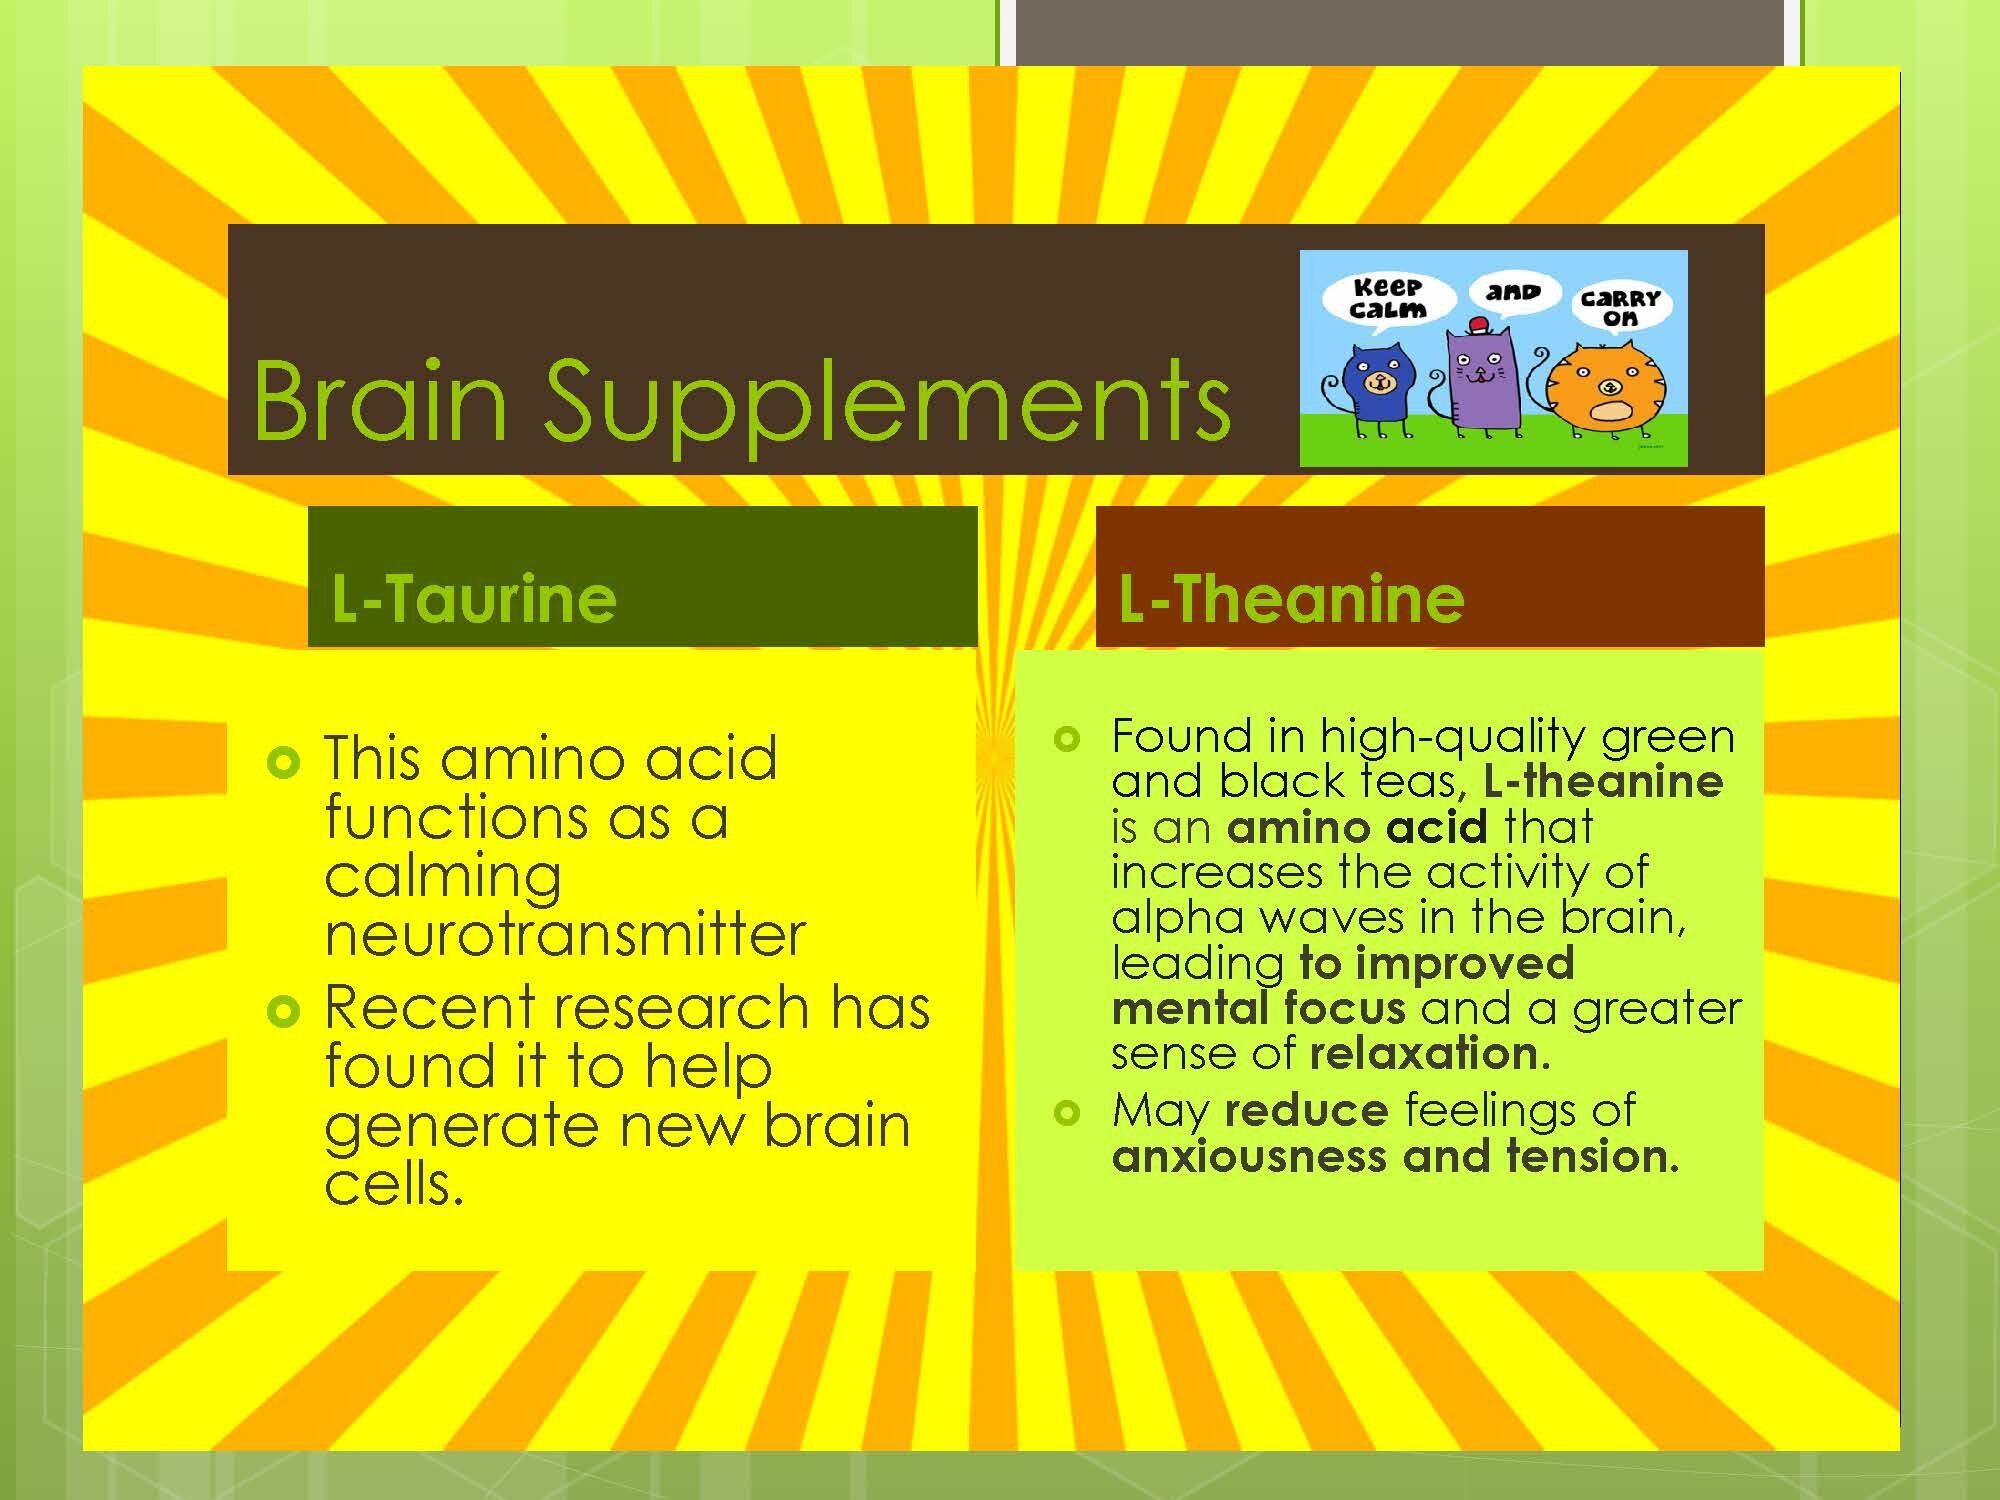 Healthy Nutrients for a Healthy BrainSS!_Page_09.jpg